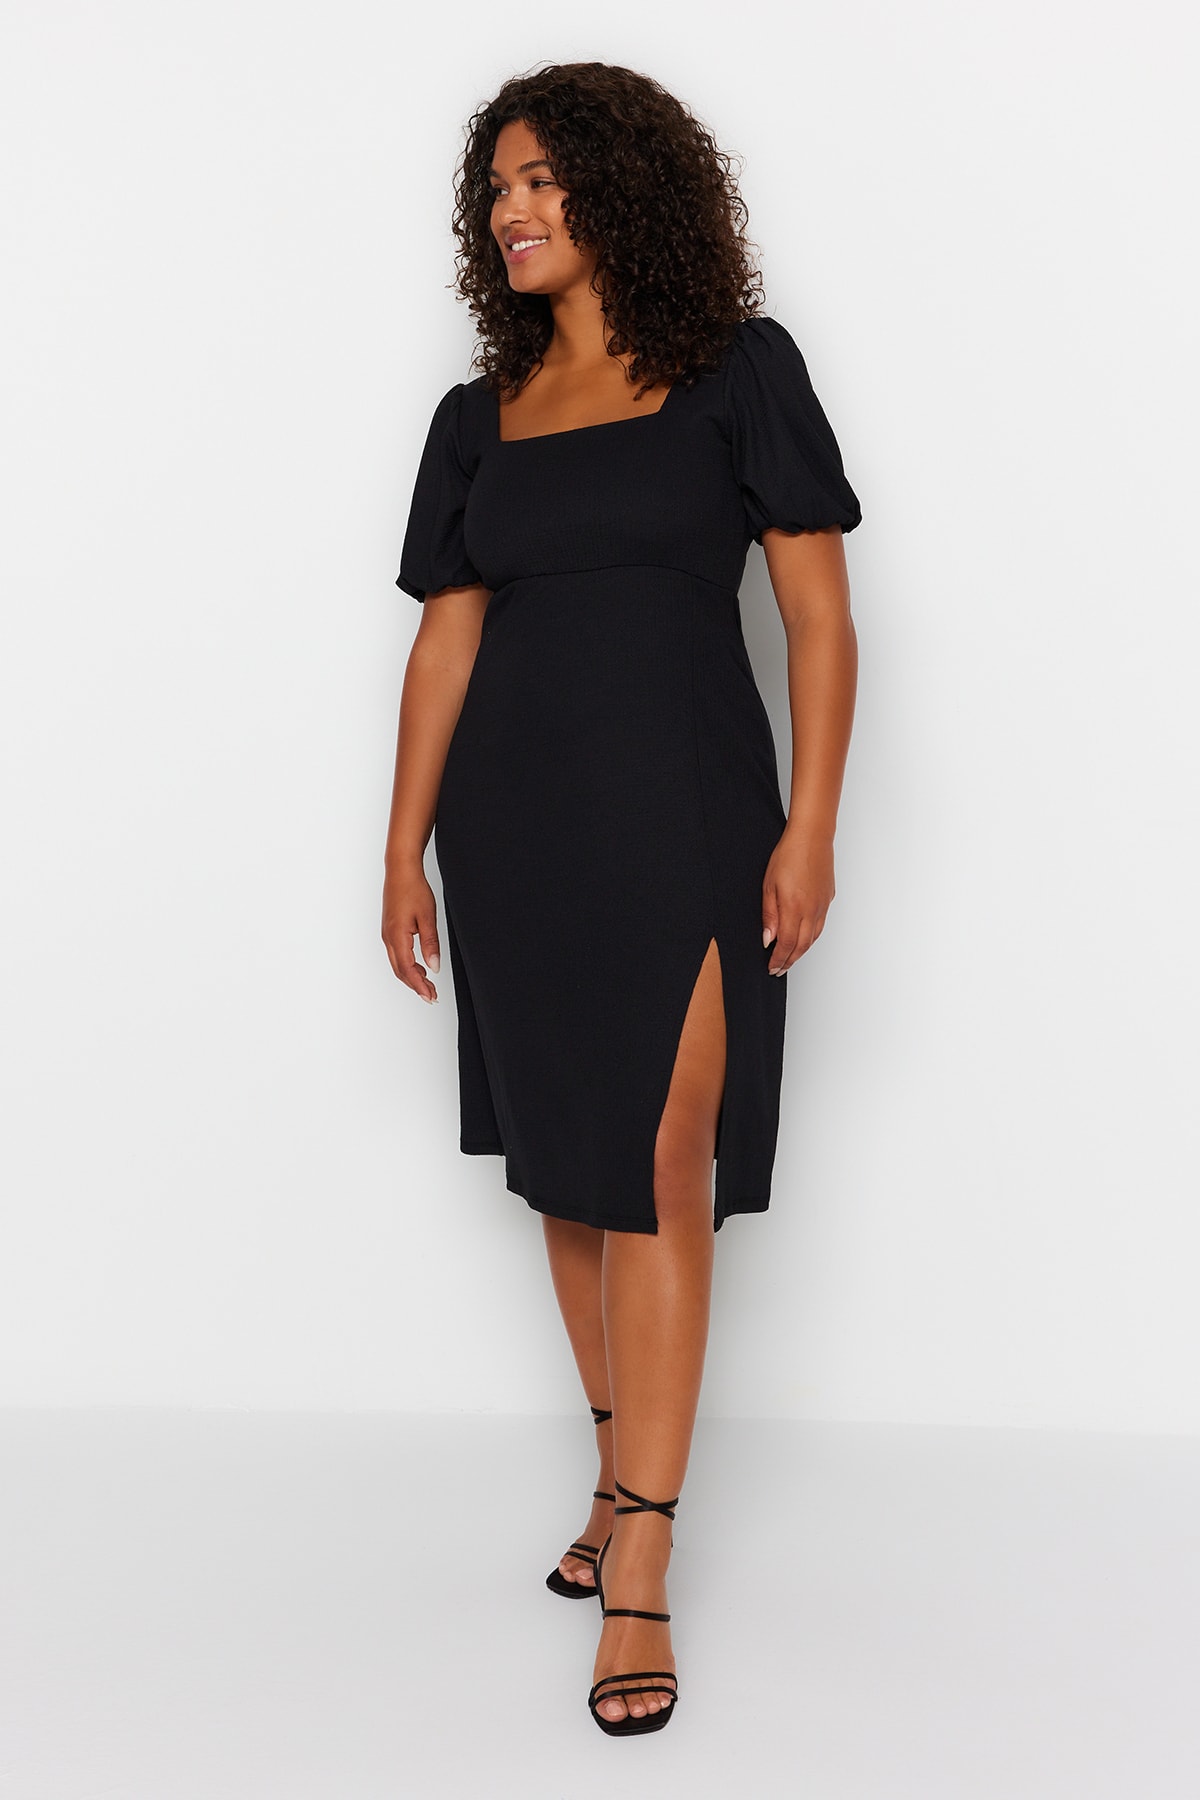 Trendyol Plus Size Black Knitted Dress with a Slit